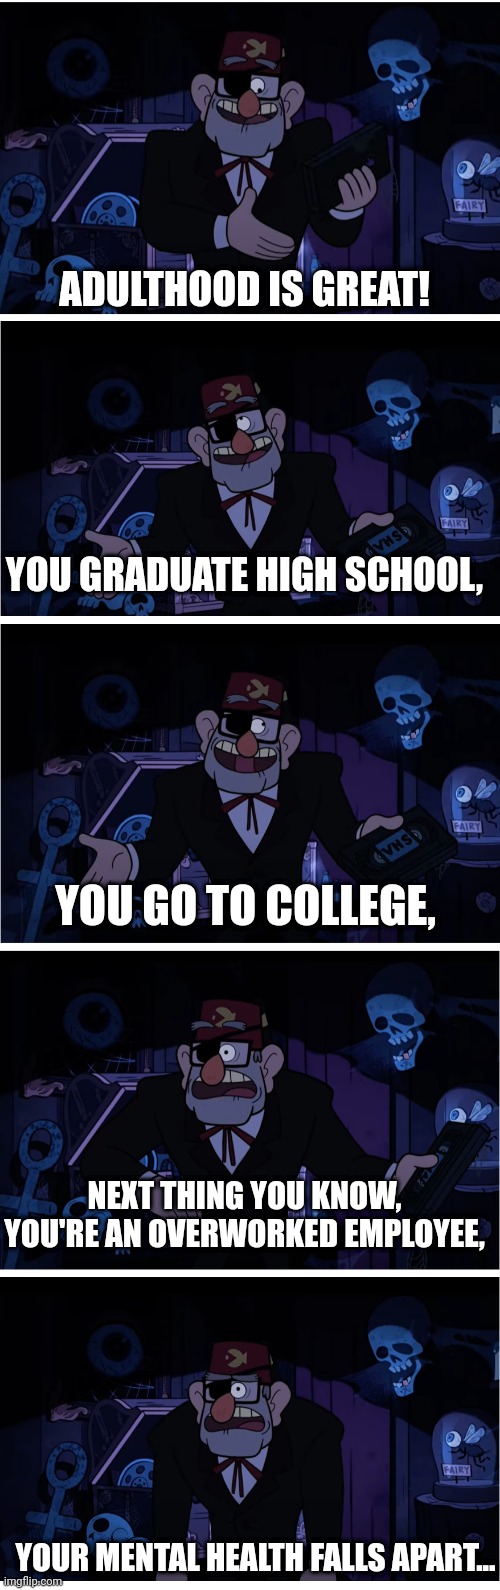 Grunkle Stan Describes | ADULTHOOD IS GREAT! YOU GRADUATE HIGH SCHOOL, YOU GO TO COLLEGE, NEXT THING YOU KNOW, YOU'RE AN OVERWORKED EMPLOYEE, YOUR MENTAL HEALTH FALLS APART... | image tagged in grunkle stan describes,work,college,adulting,graduation,stress | made w/ Imgflip meme maker